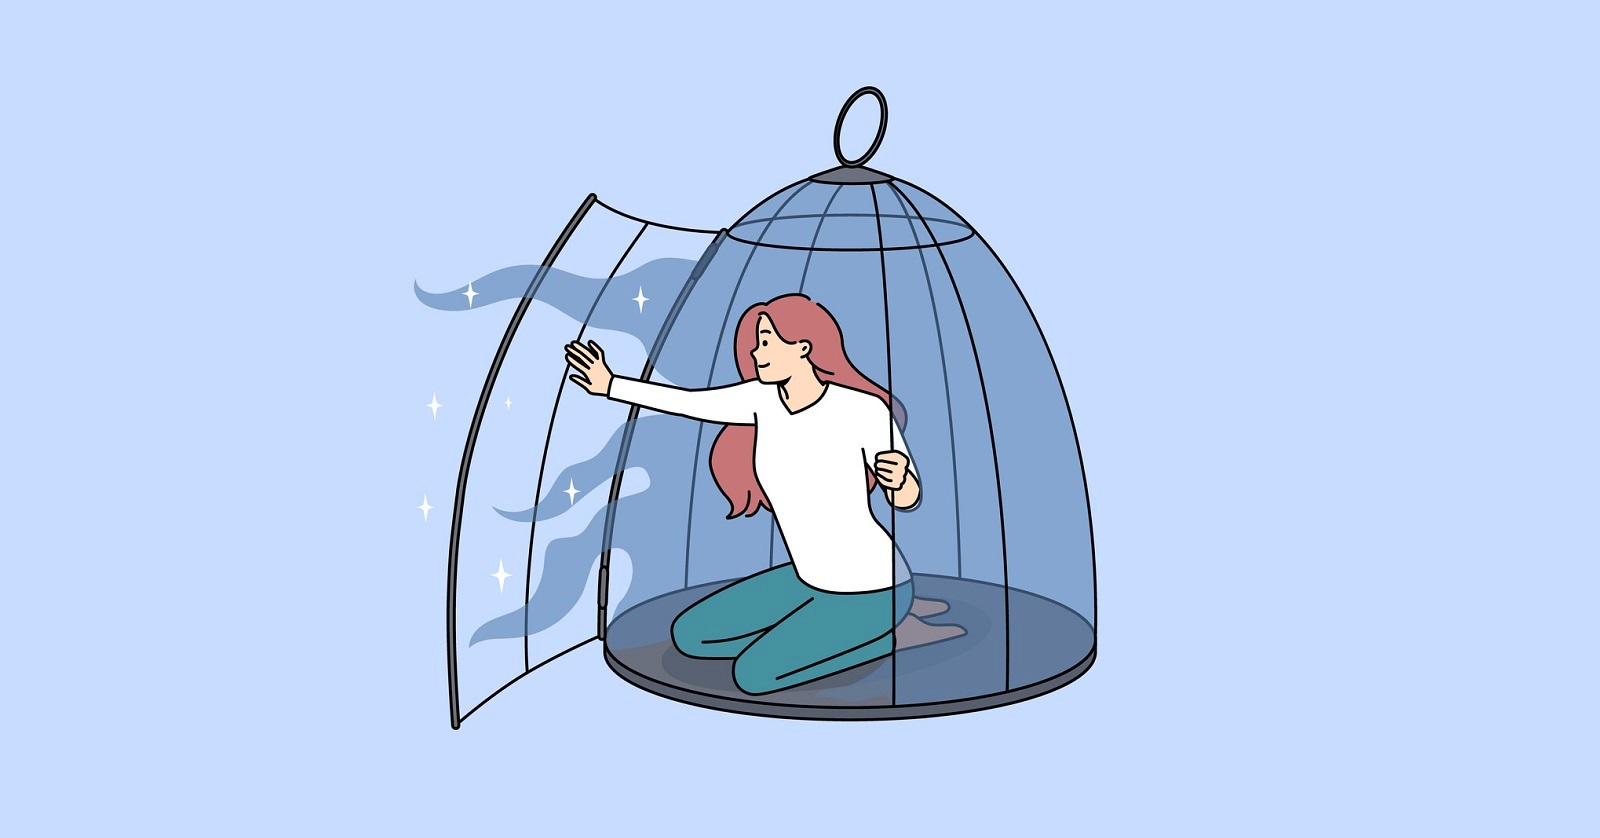 surviving or thriving illustrated by a picture of a woman climbing out of a birdcage